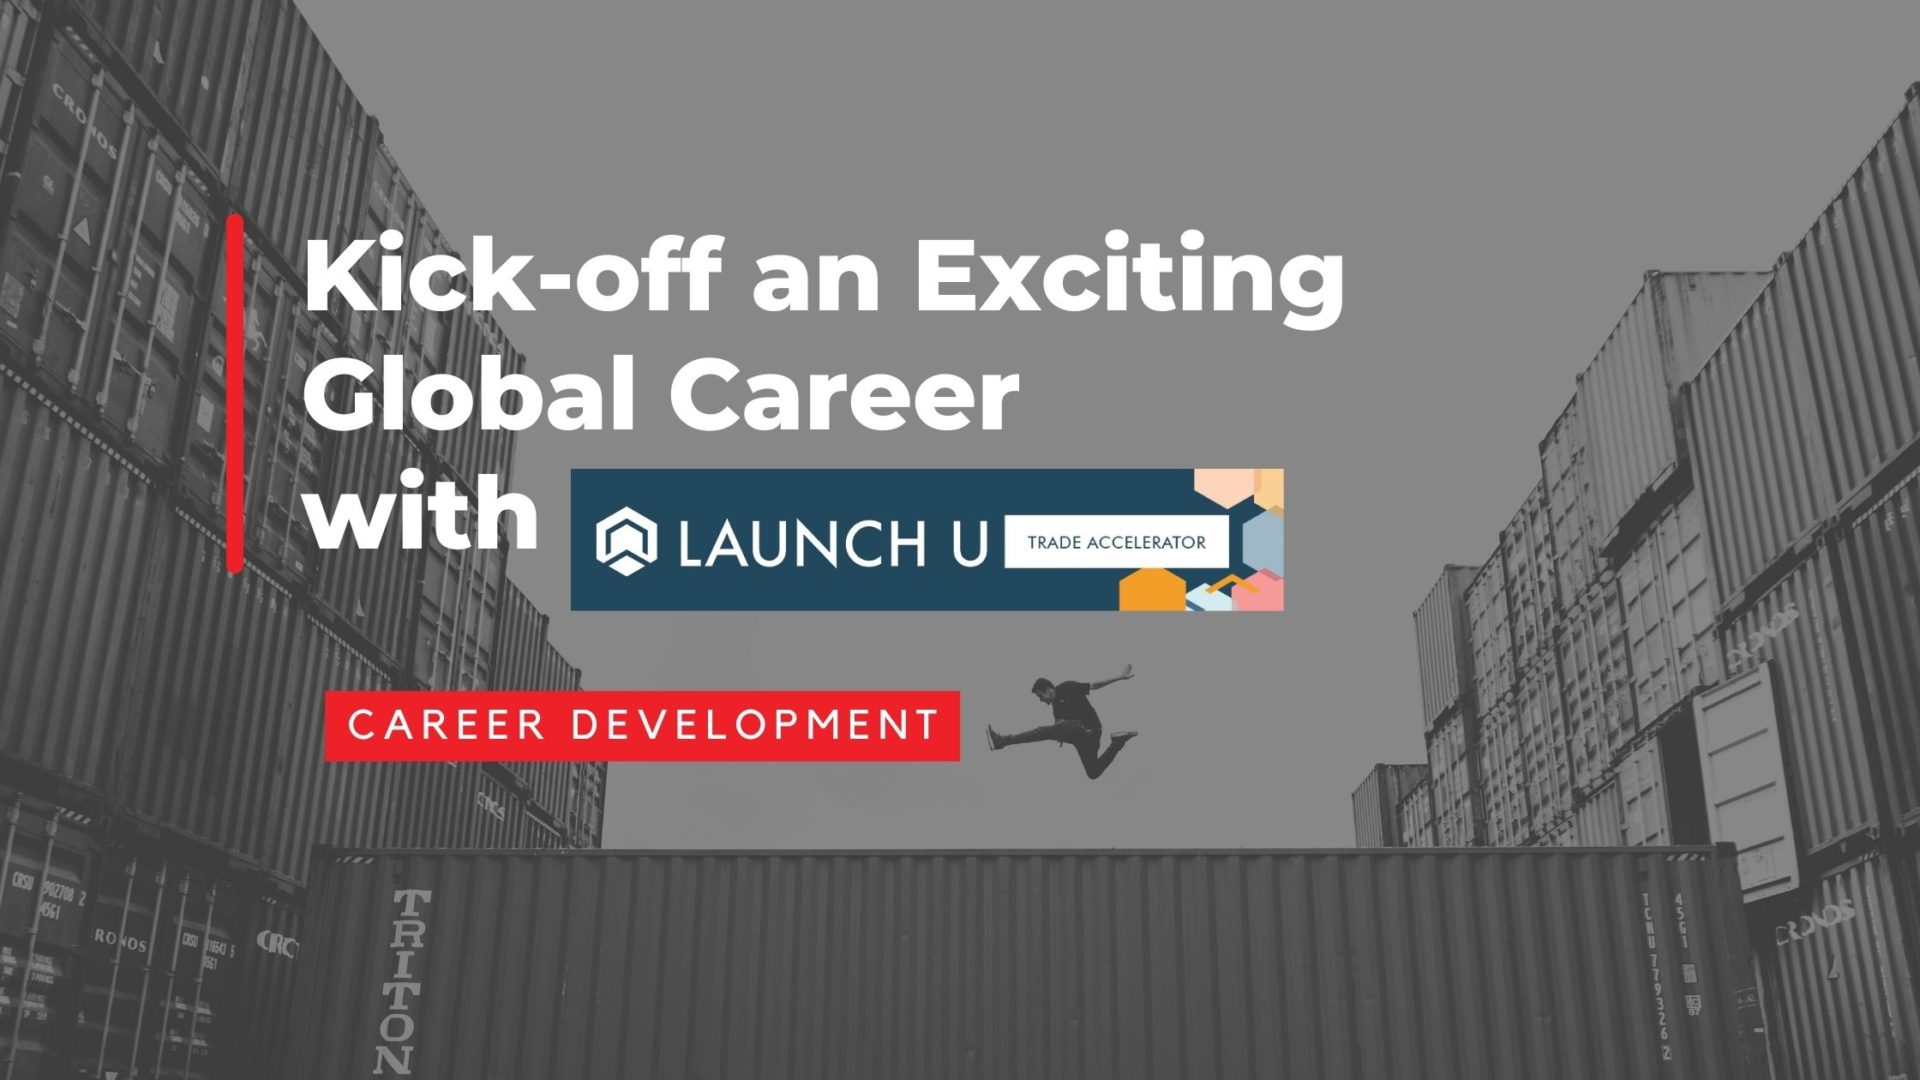 Kick-off an Exciting Global Career with Launch U Queensland 2022